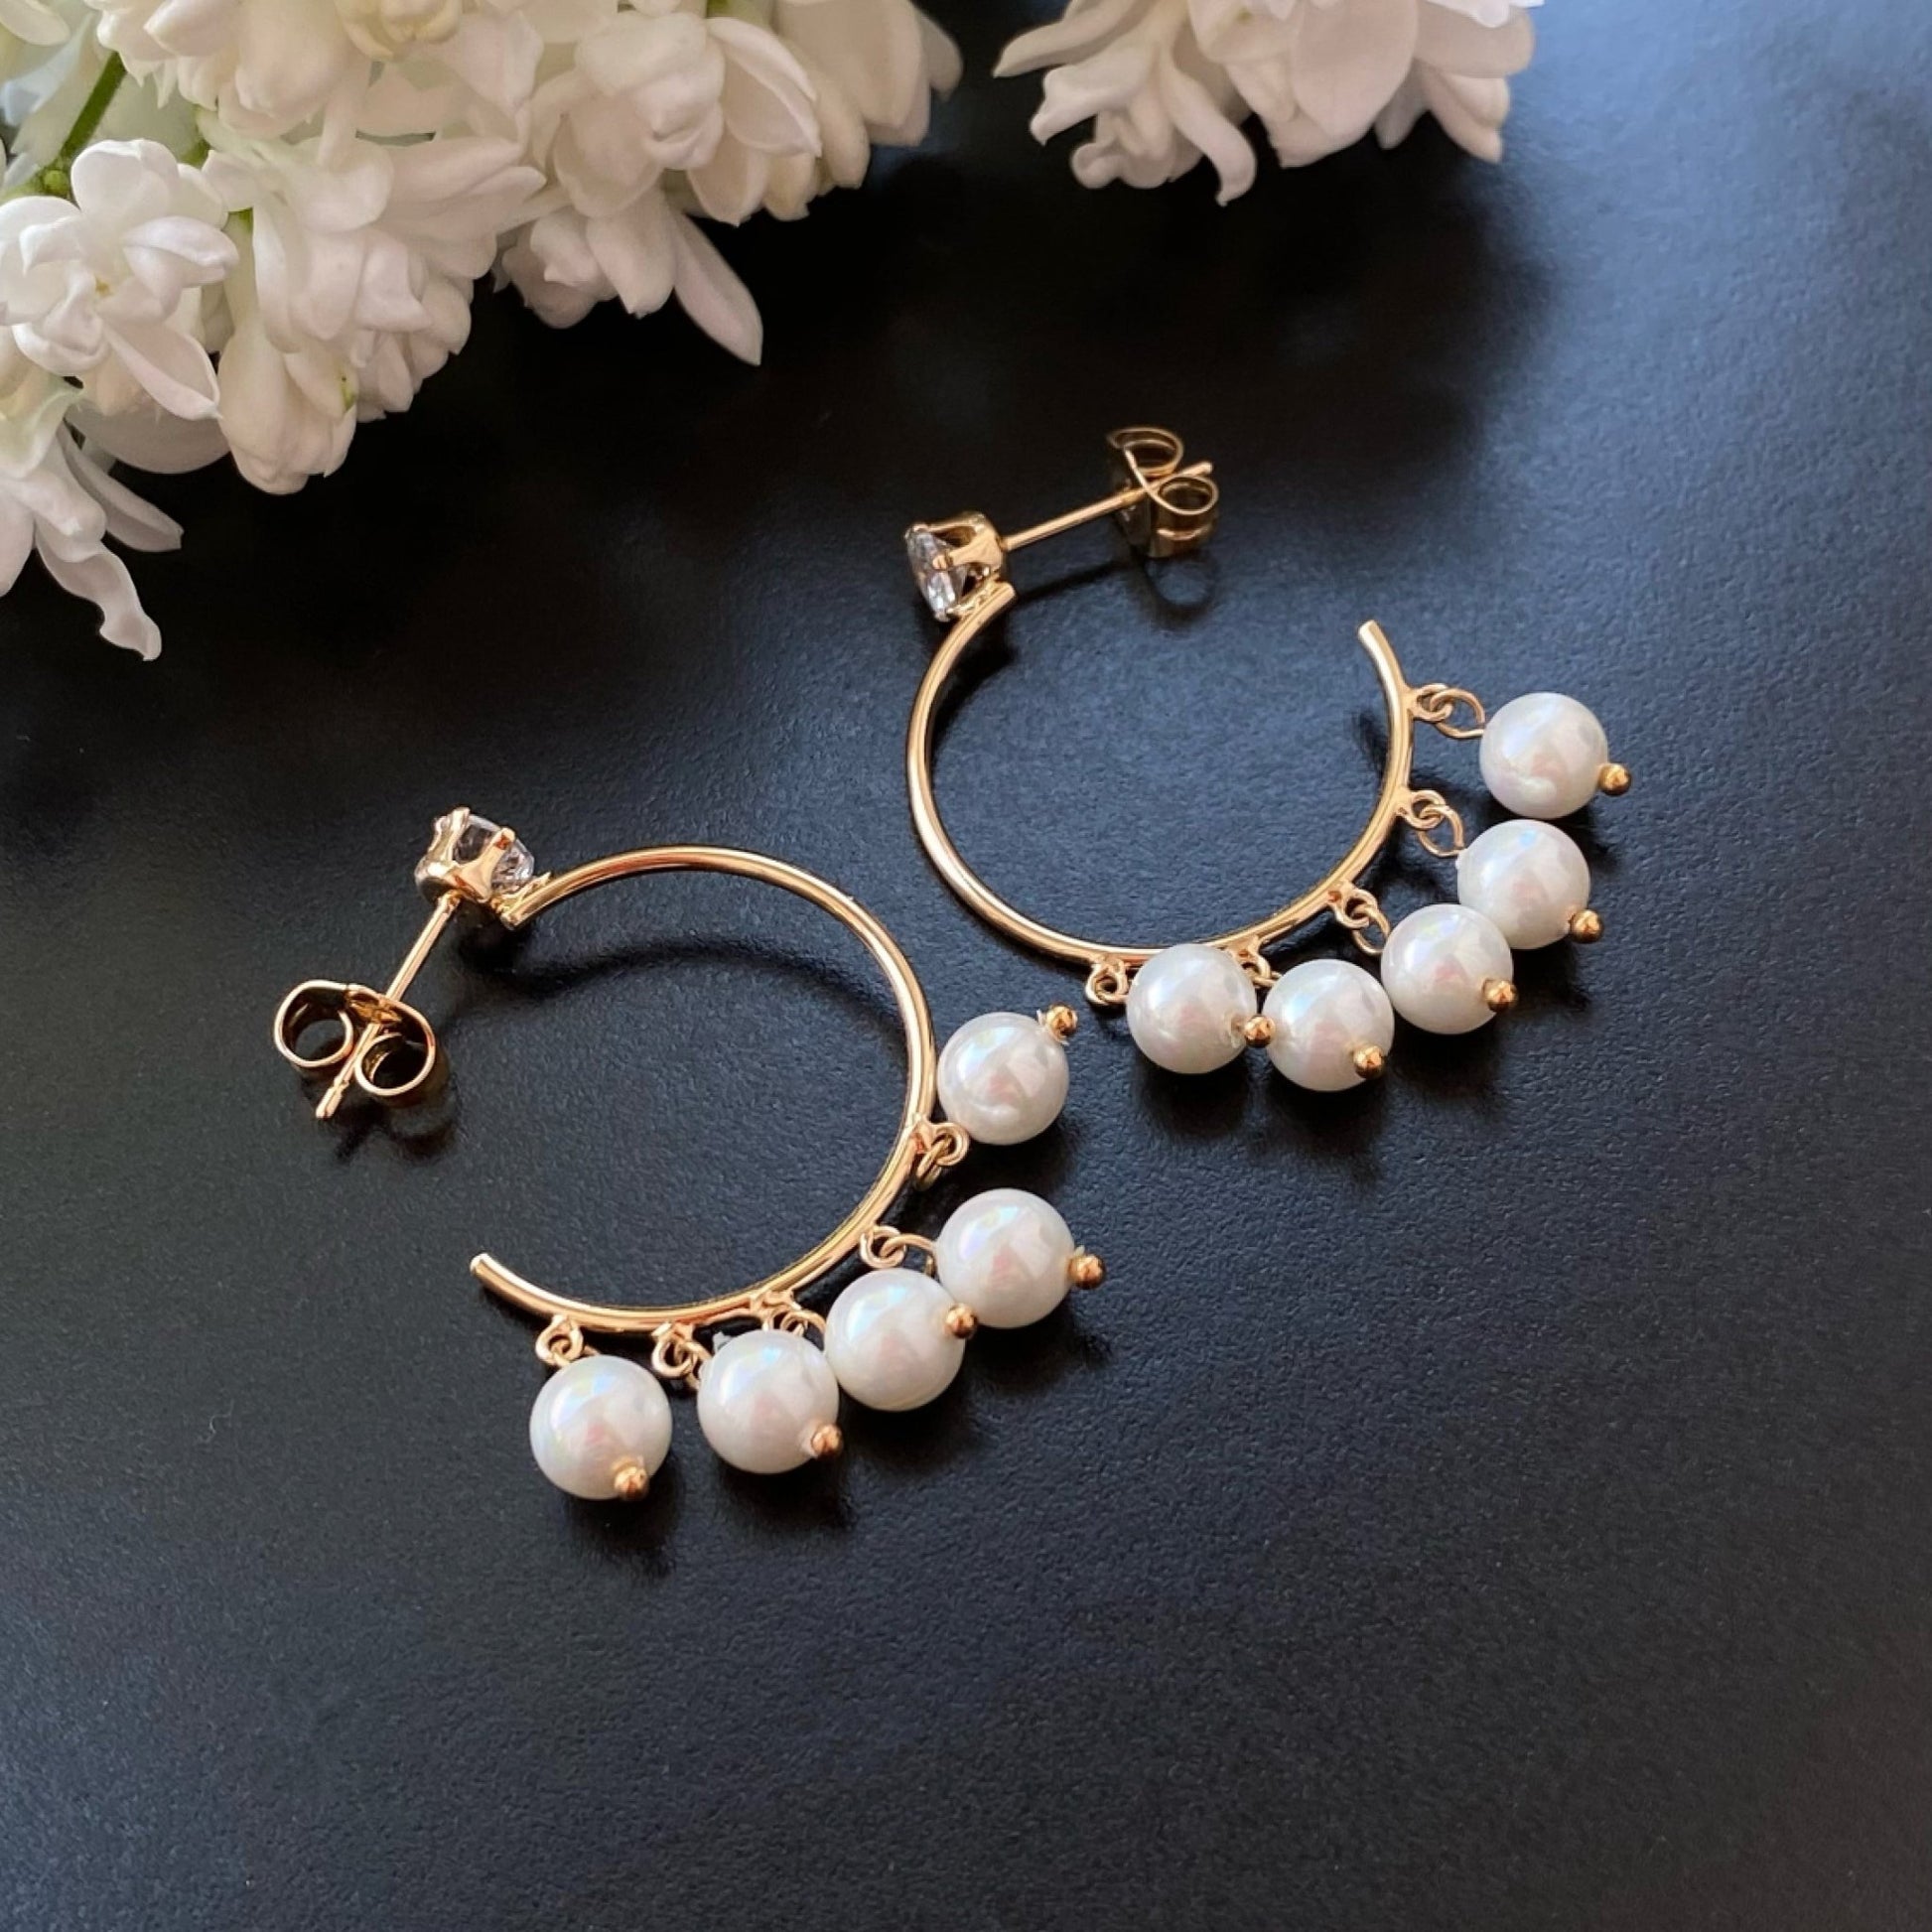 GOLD PLATED HOOP EARRINGS WITH PEARLS -